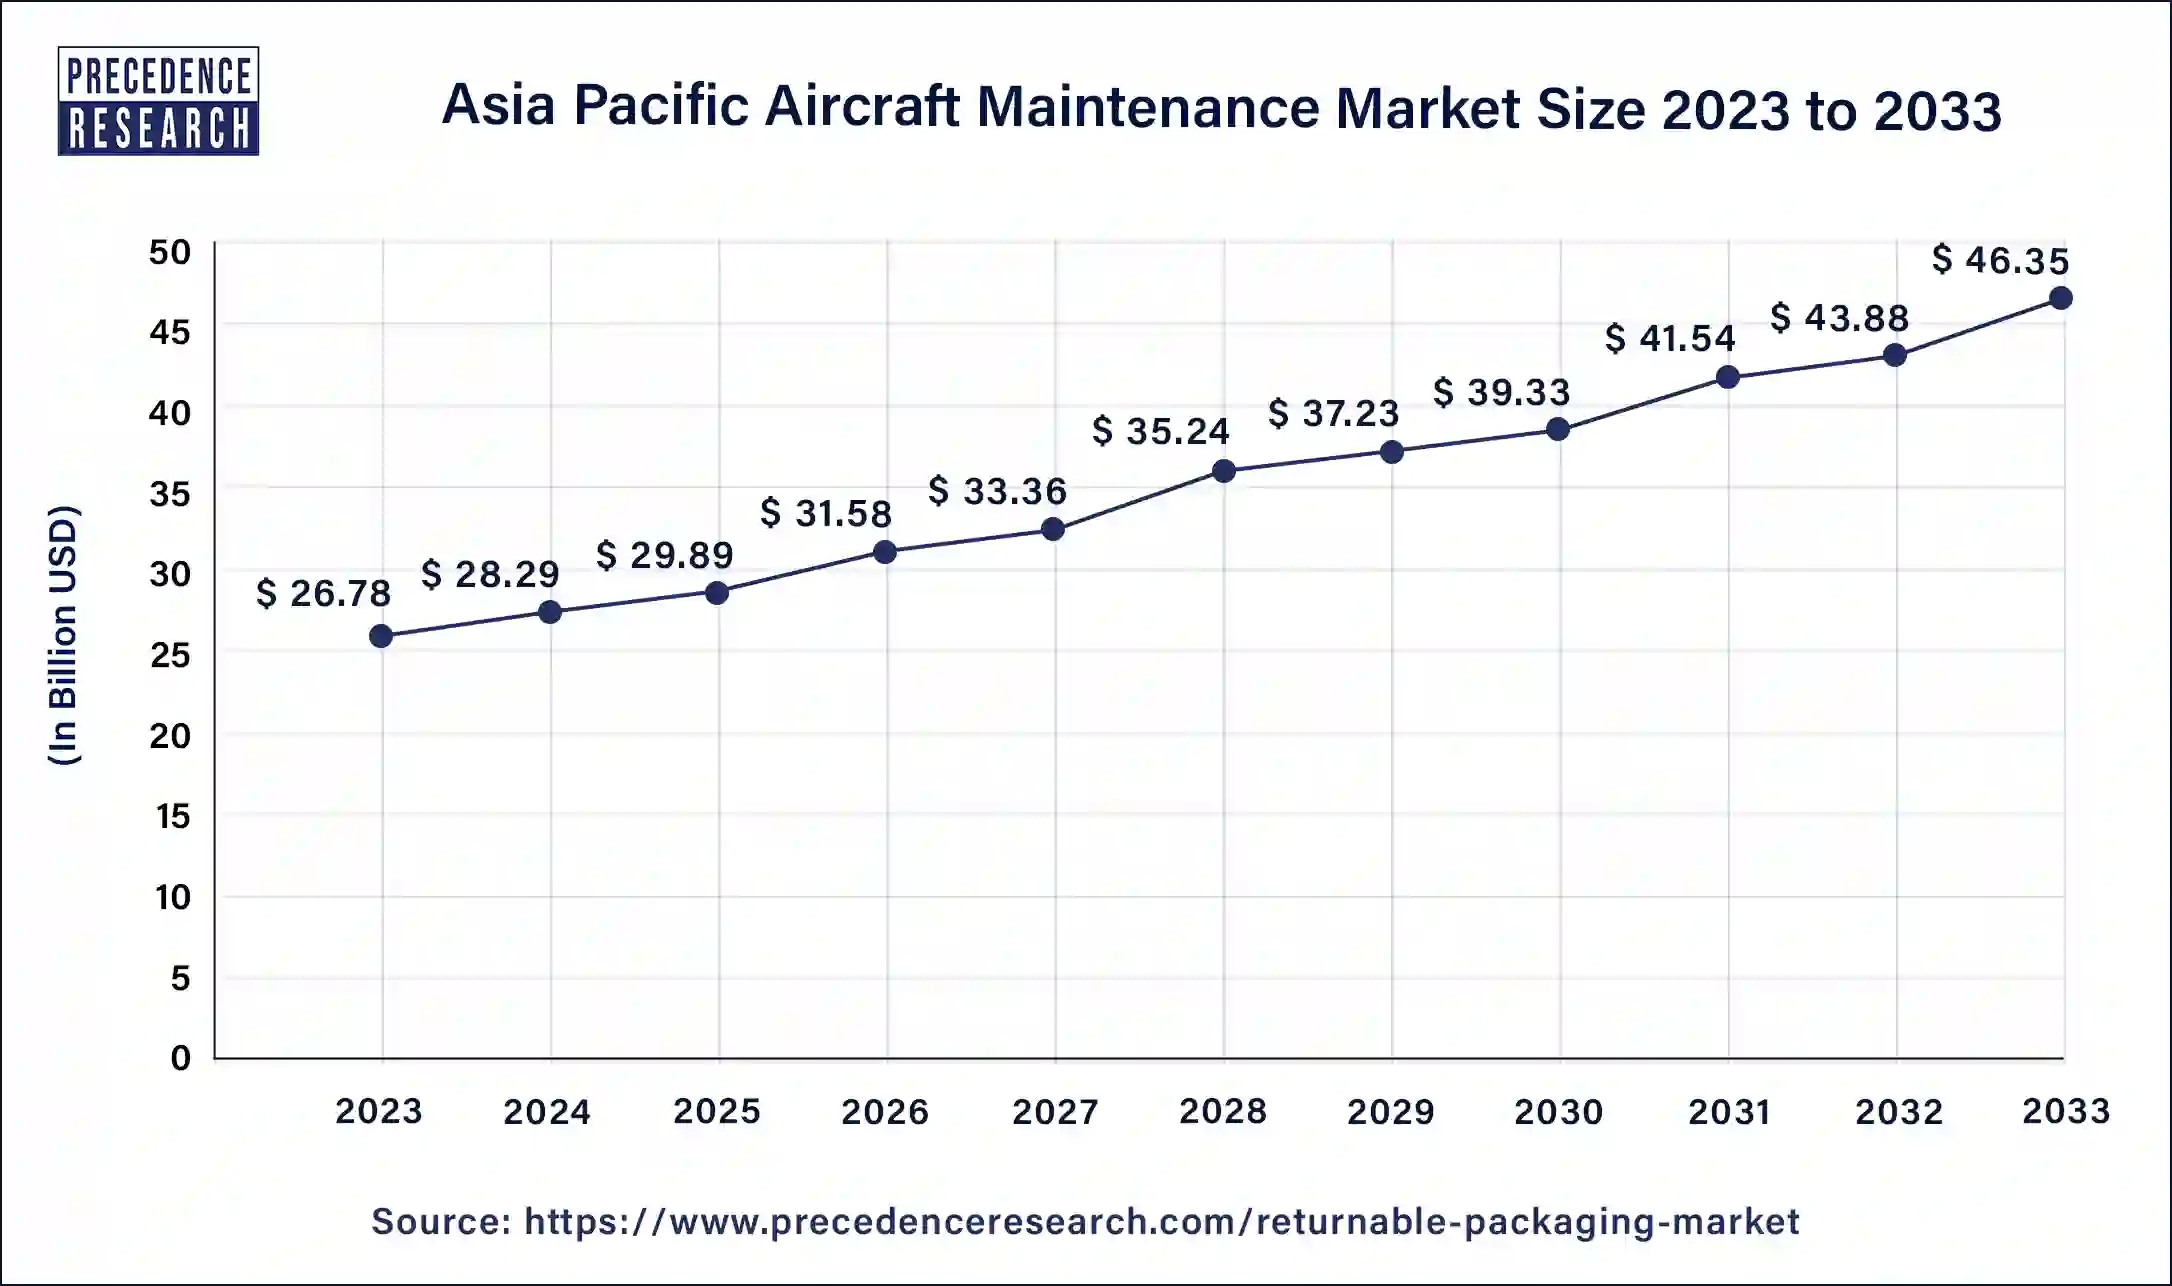 Asia Pacific Aircraft Maintenance Market Size 2024 to 2033